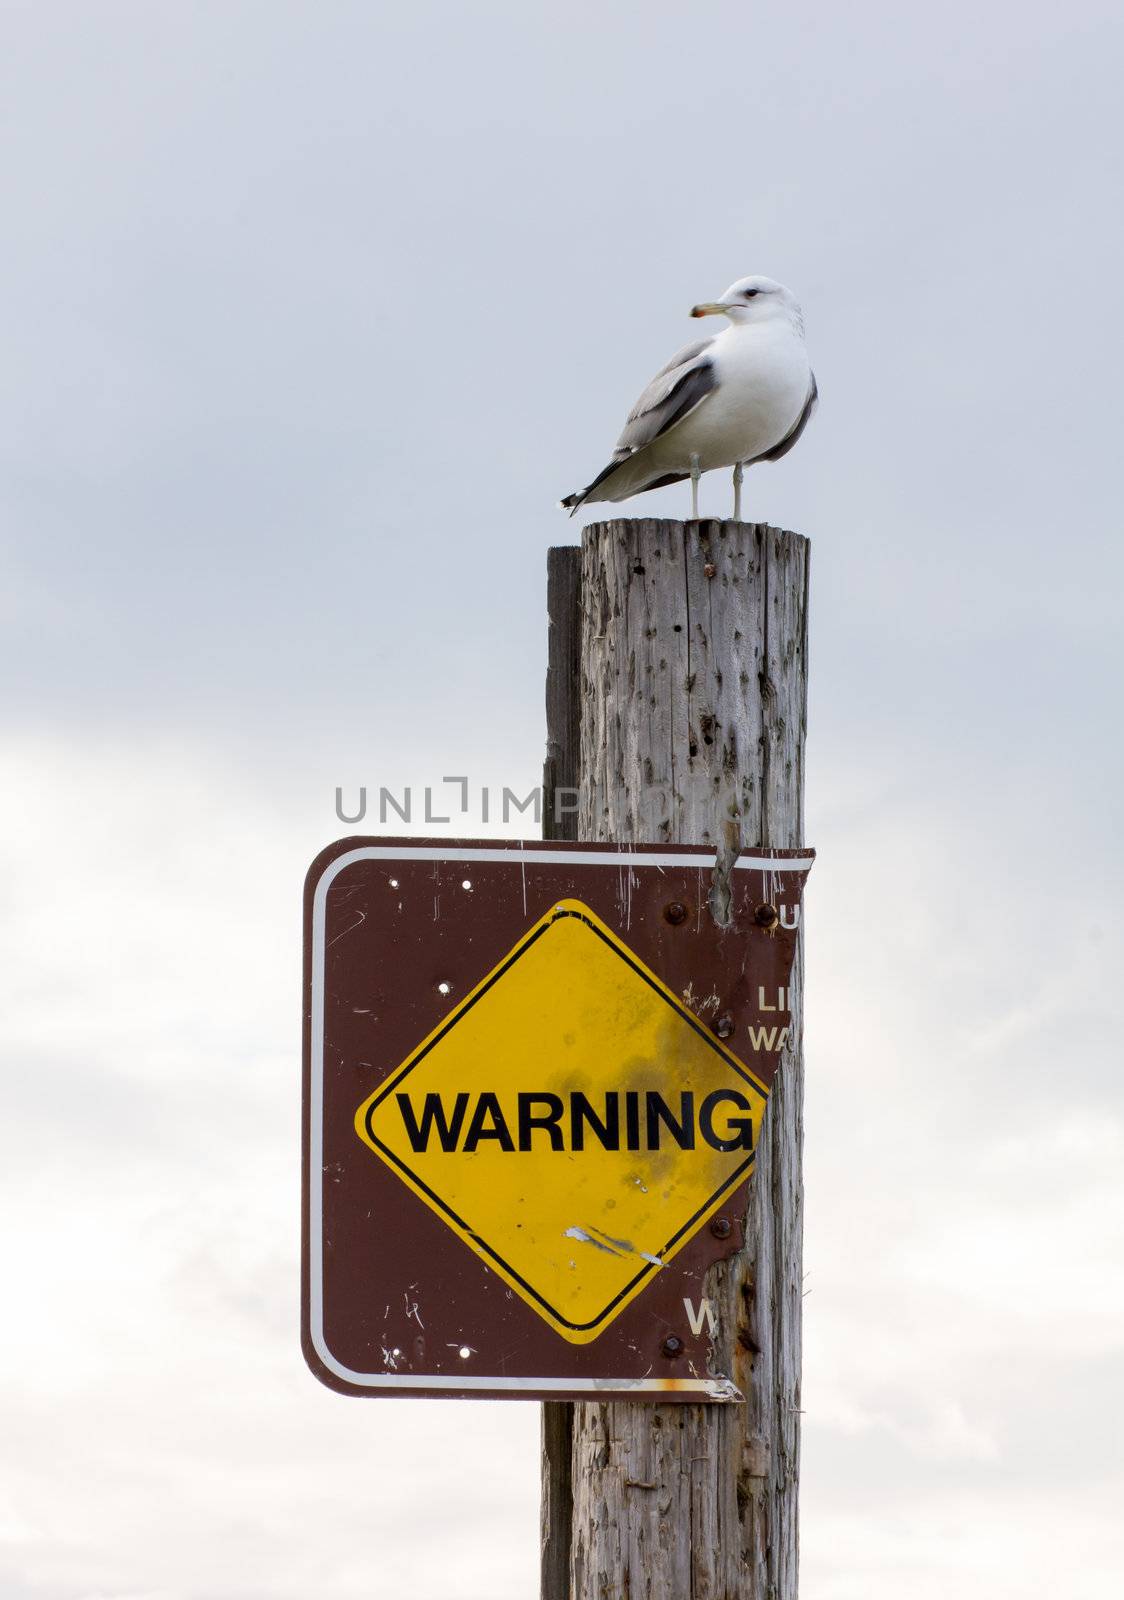 A Gull Atop a Warning Sign Over Monterey Bay